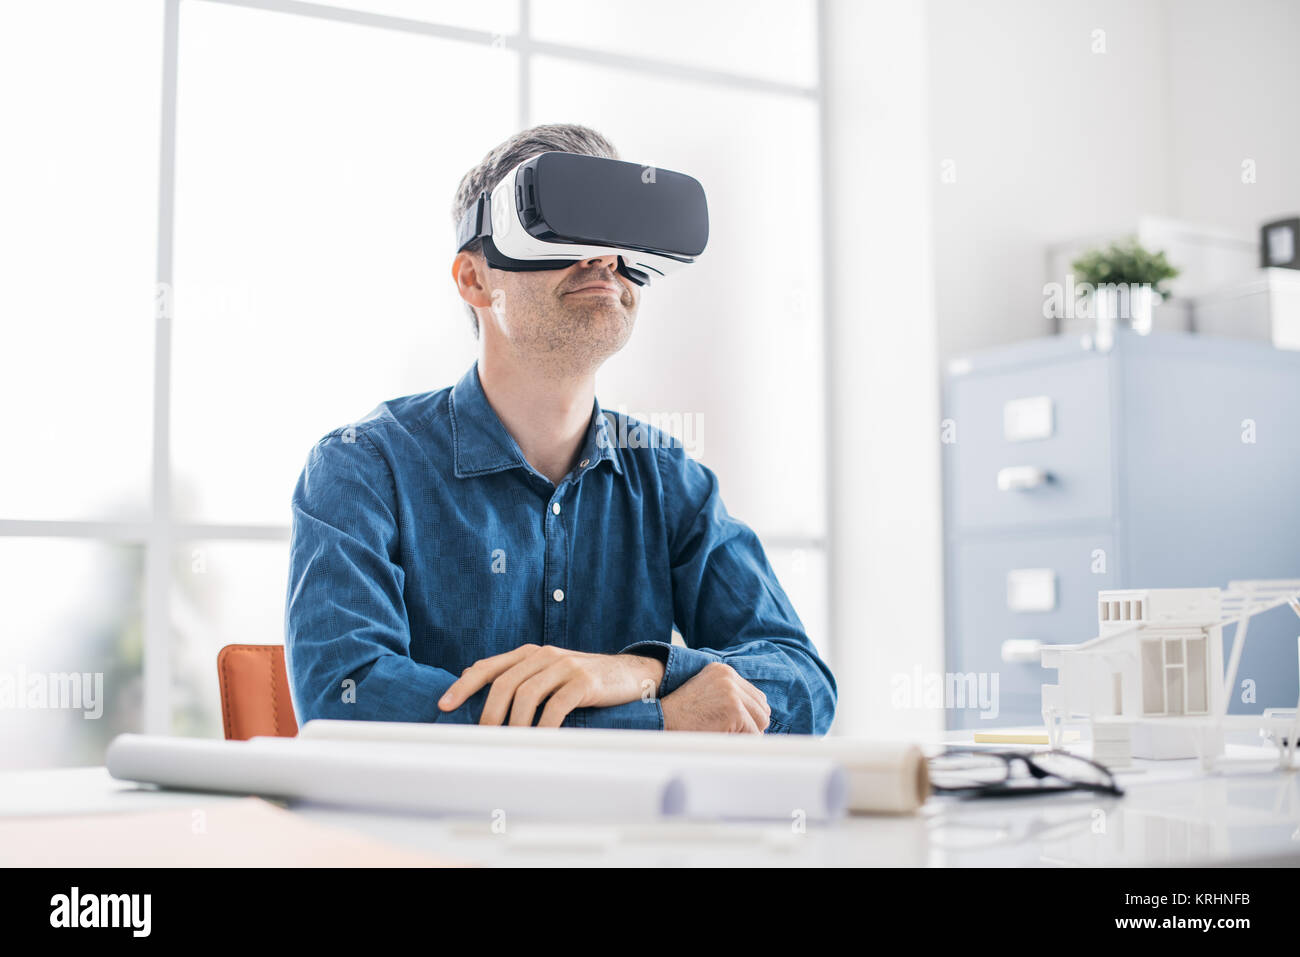 Professional architect working at office desk and wearing a VR headset, he is viewing a virtual reality interface Stock Photo